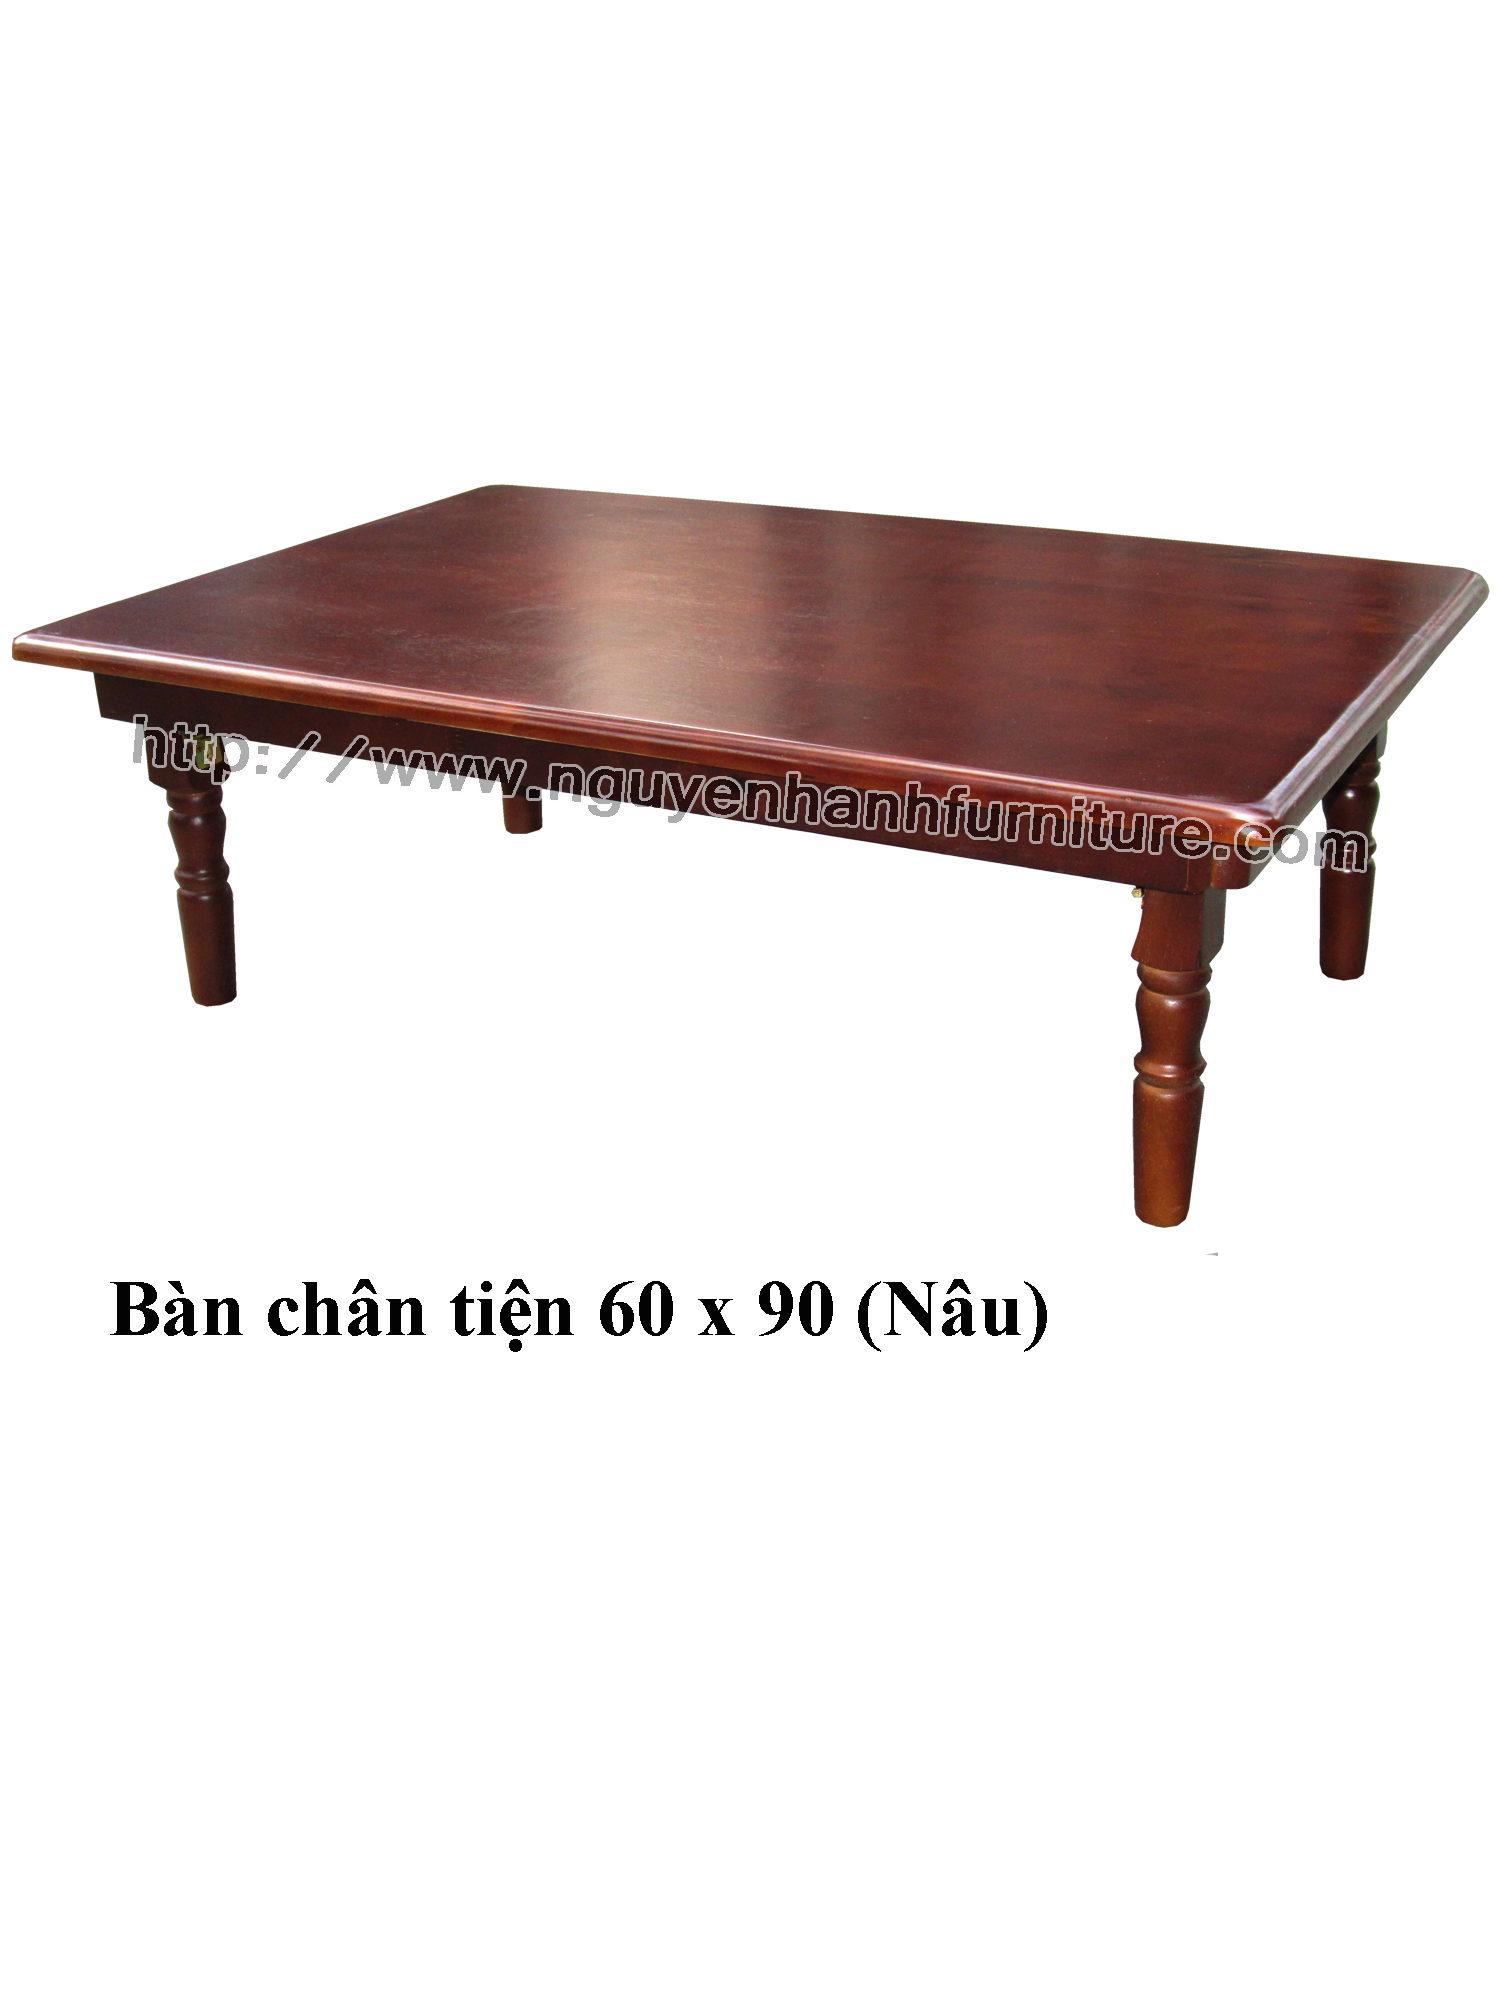 Name product: 6 x 9 Tea Table with turnery legs (Brown) - Dimensions: 60 x 90c x 30 (H) - Description: Wood natural rubber